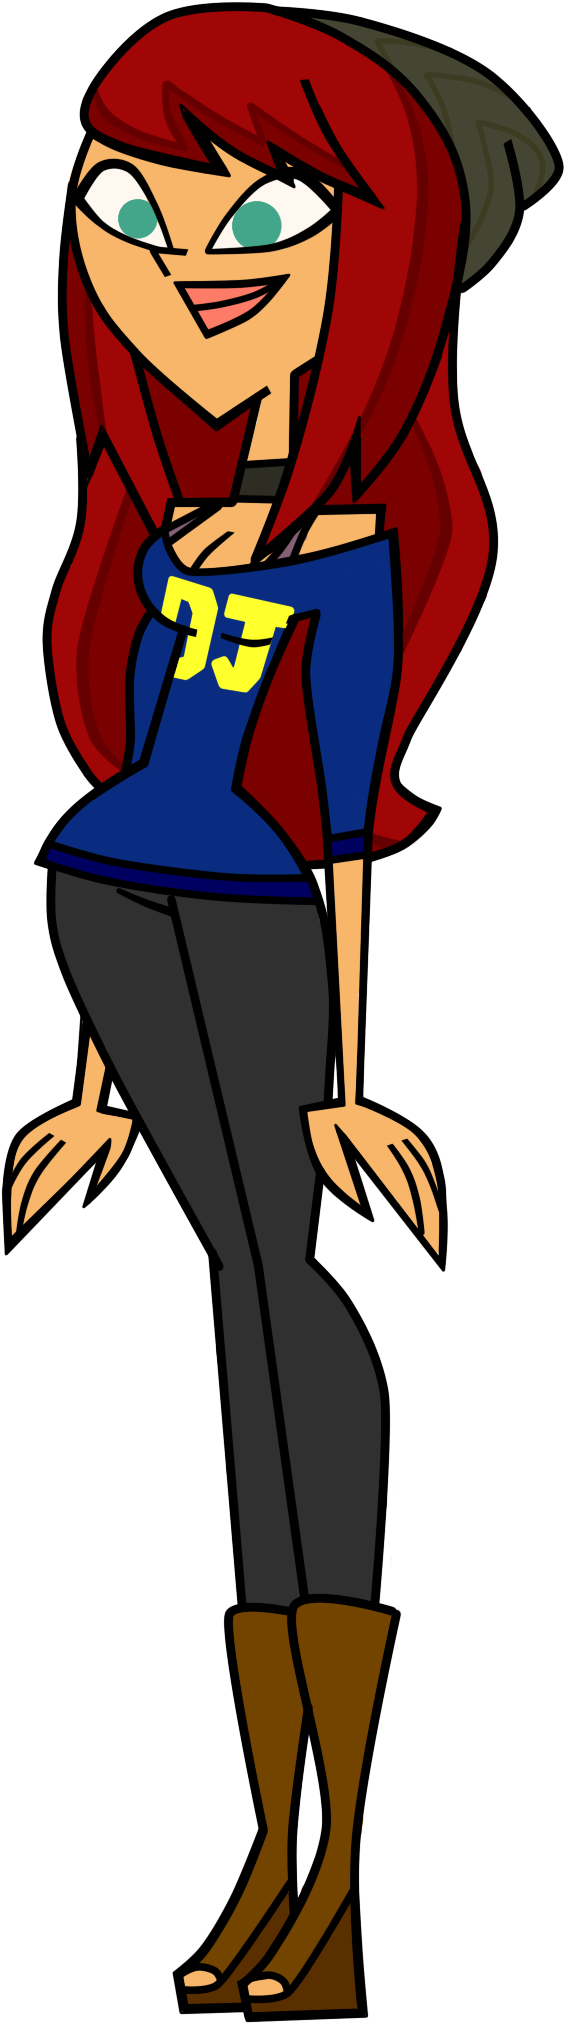 Alexis 2013 - Total Drama Fake Characters (757x2059)